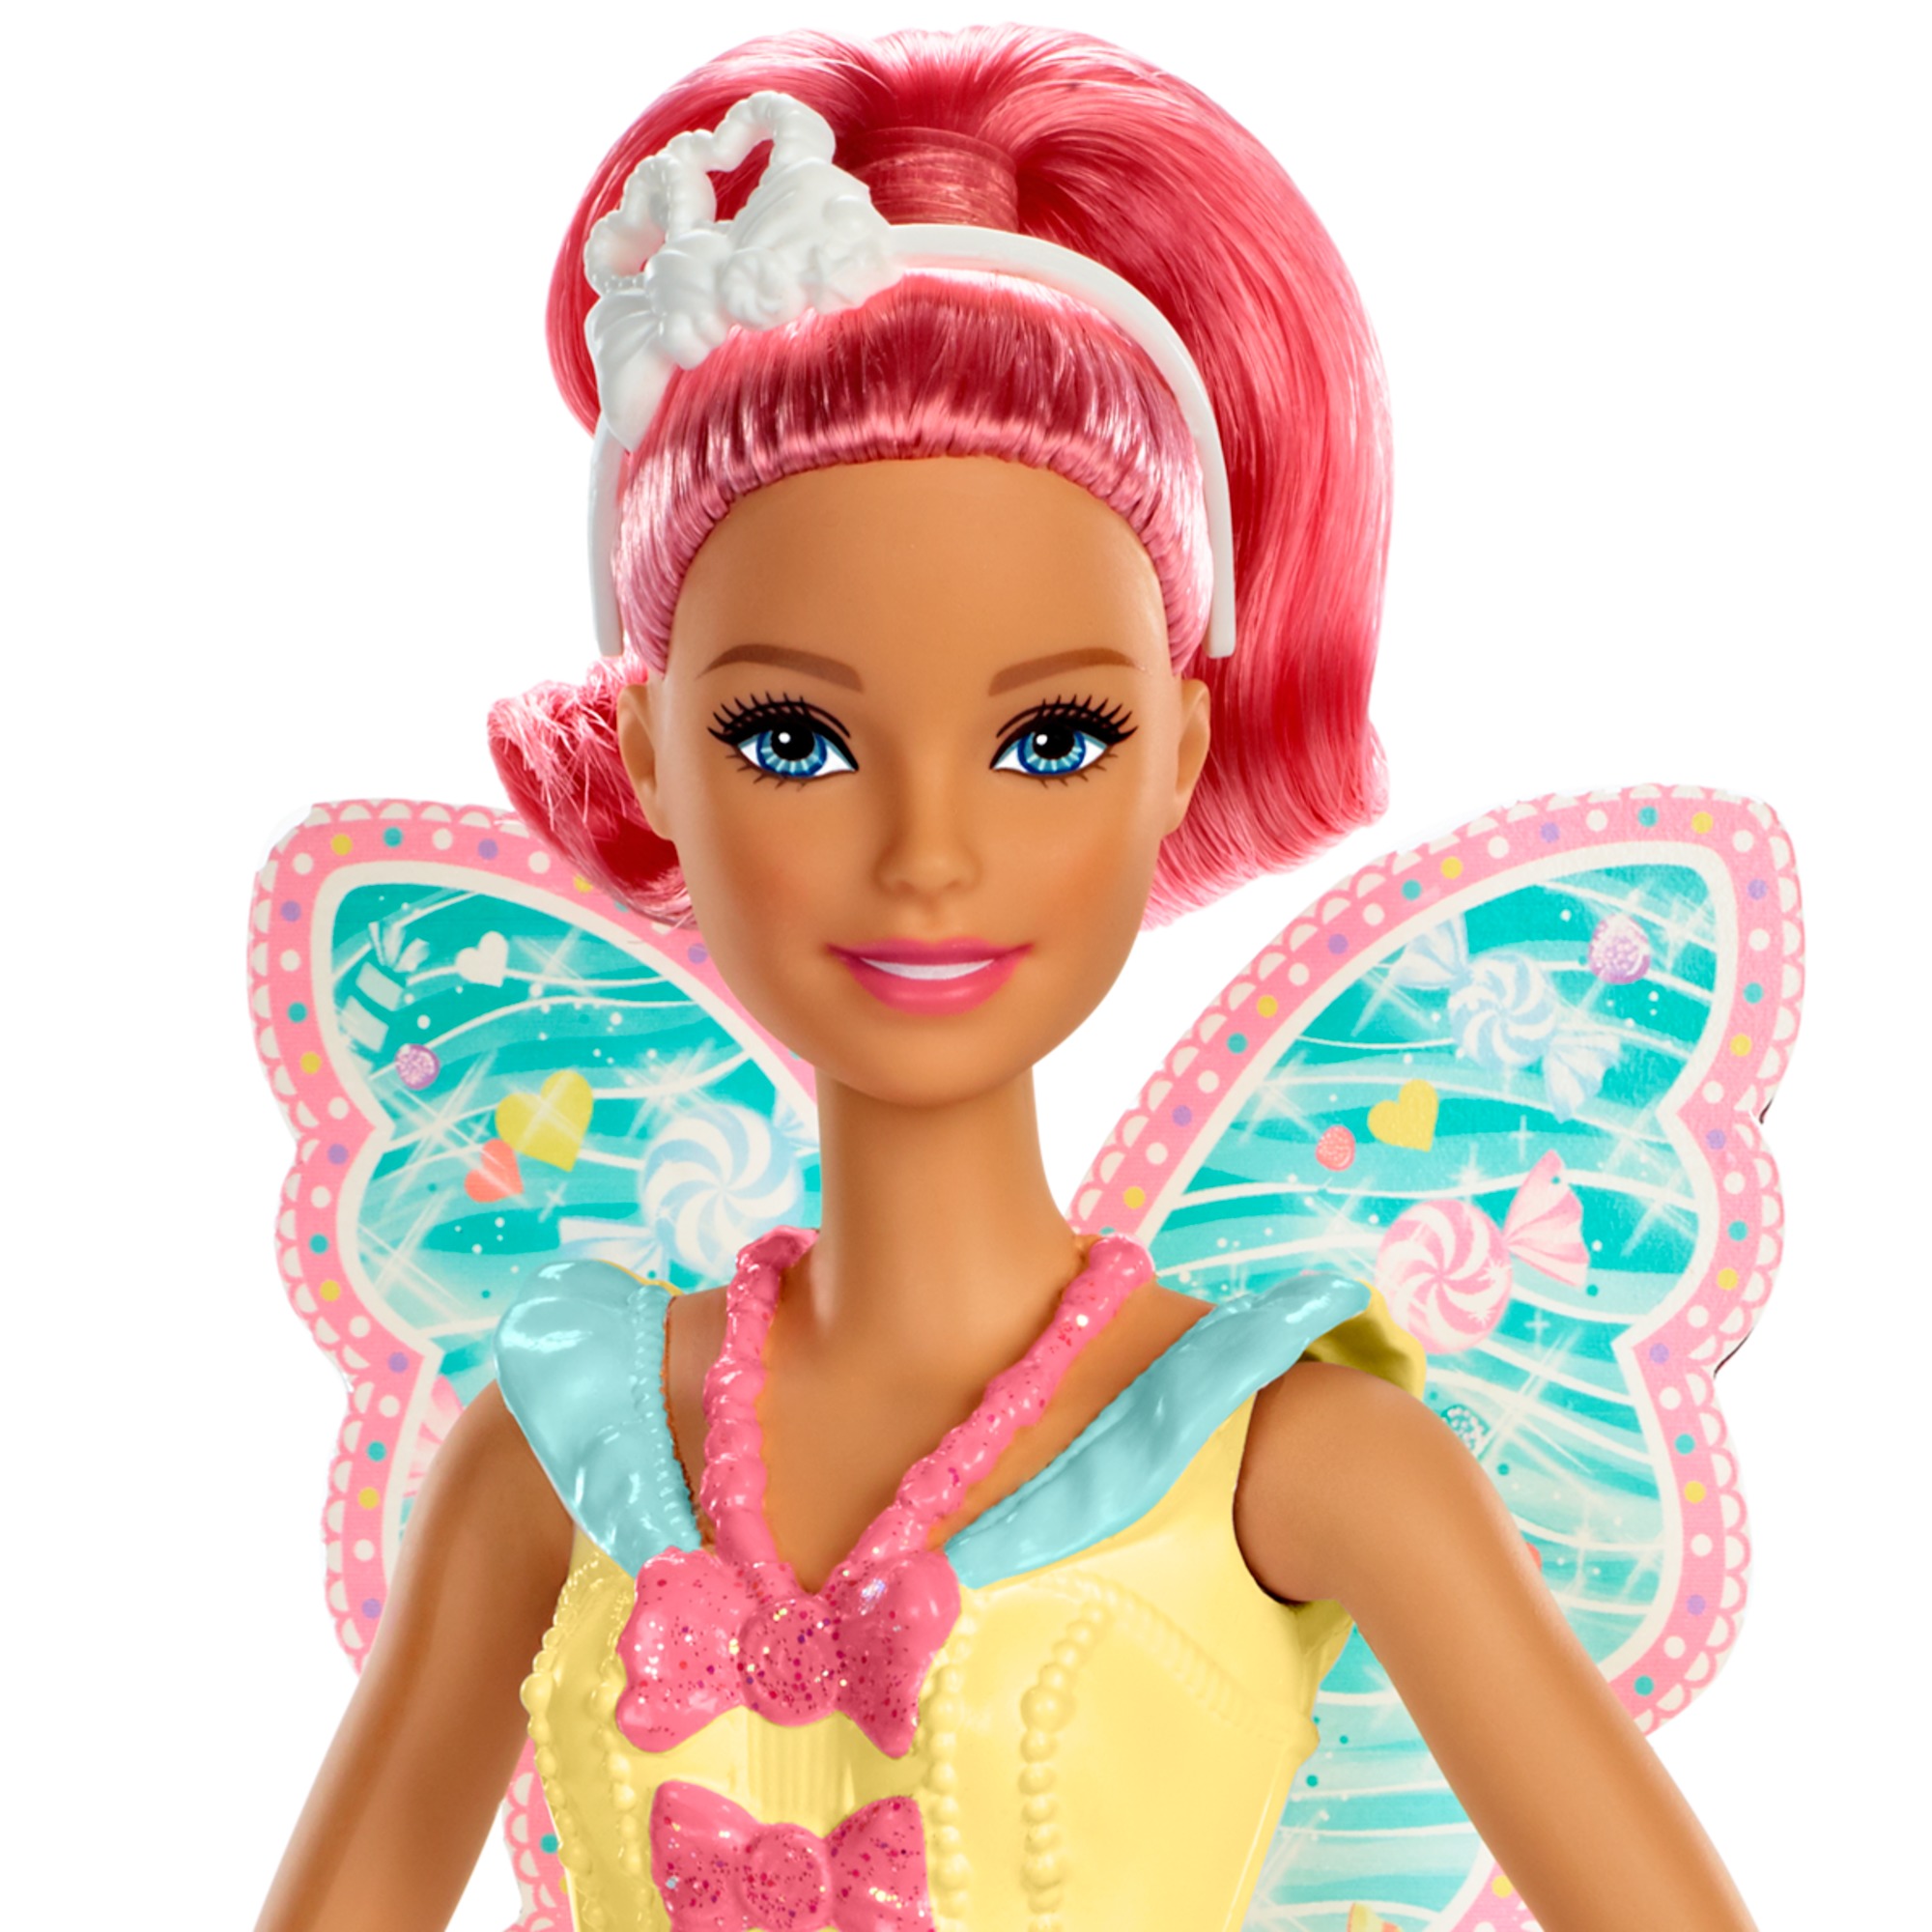 Barbie Dreamtopia Fairy Doll, Pink Hair & Candy-Decorated Wings - image 4 of 8